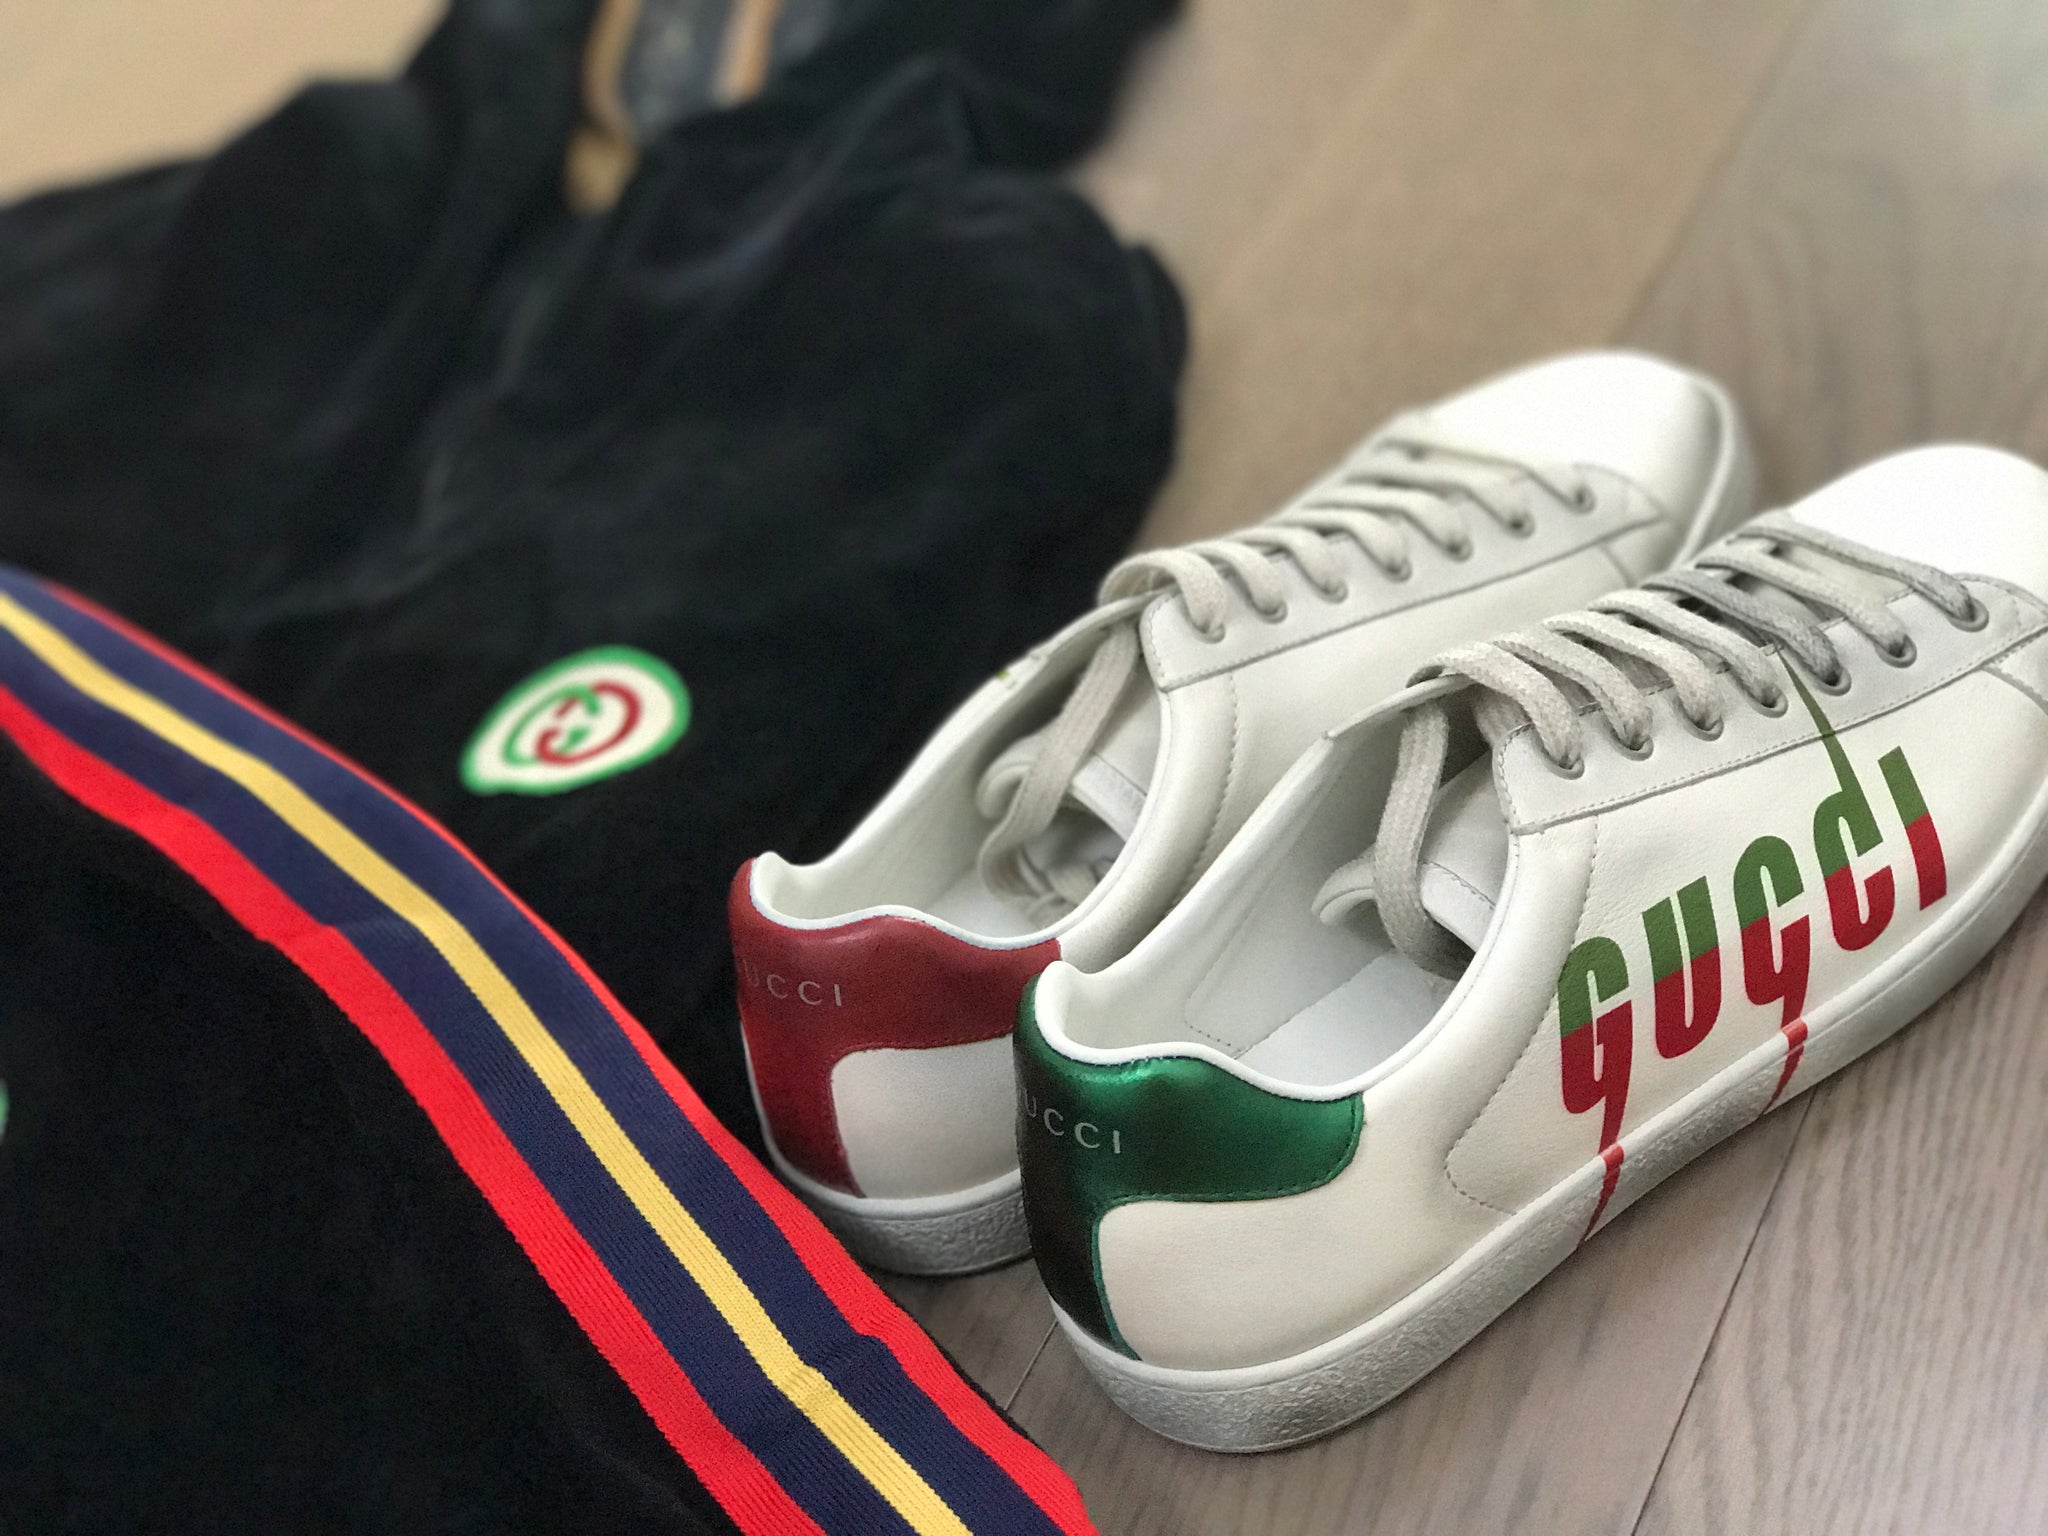 blade sneakers gucci